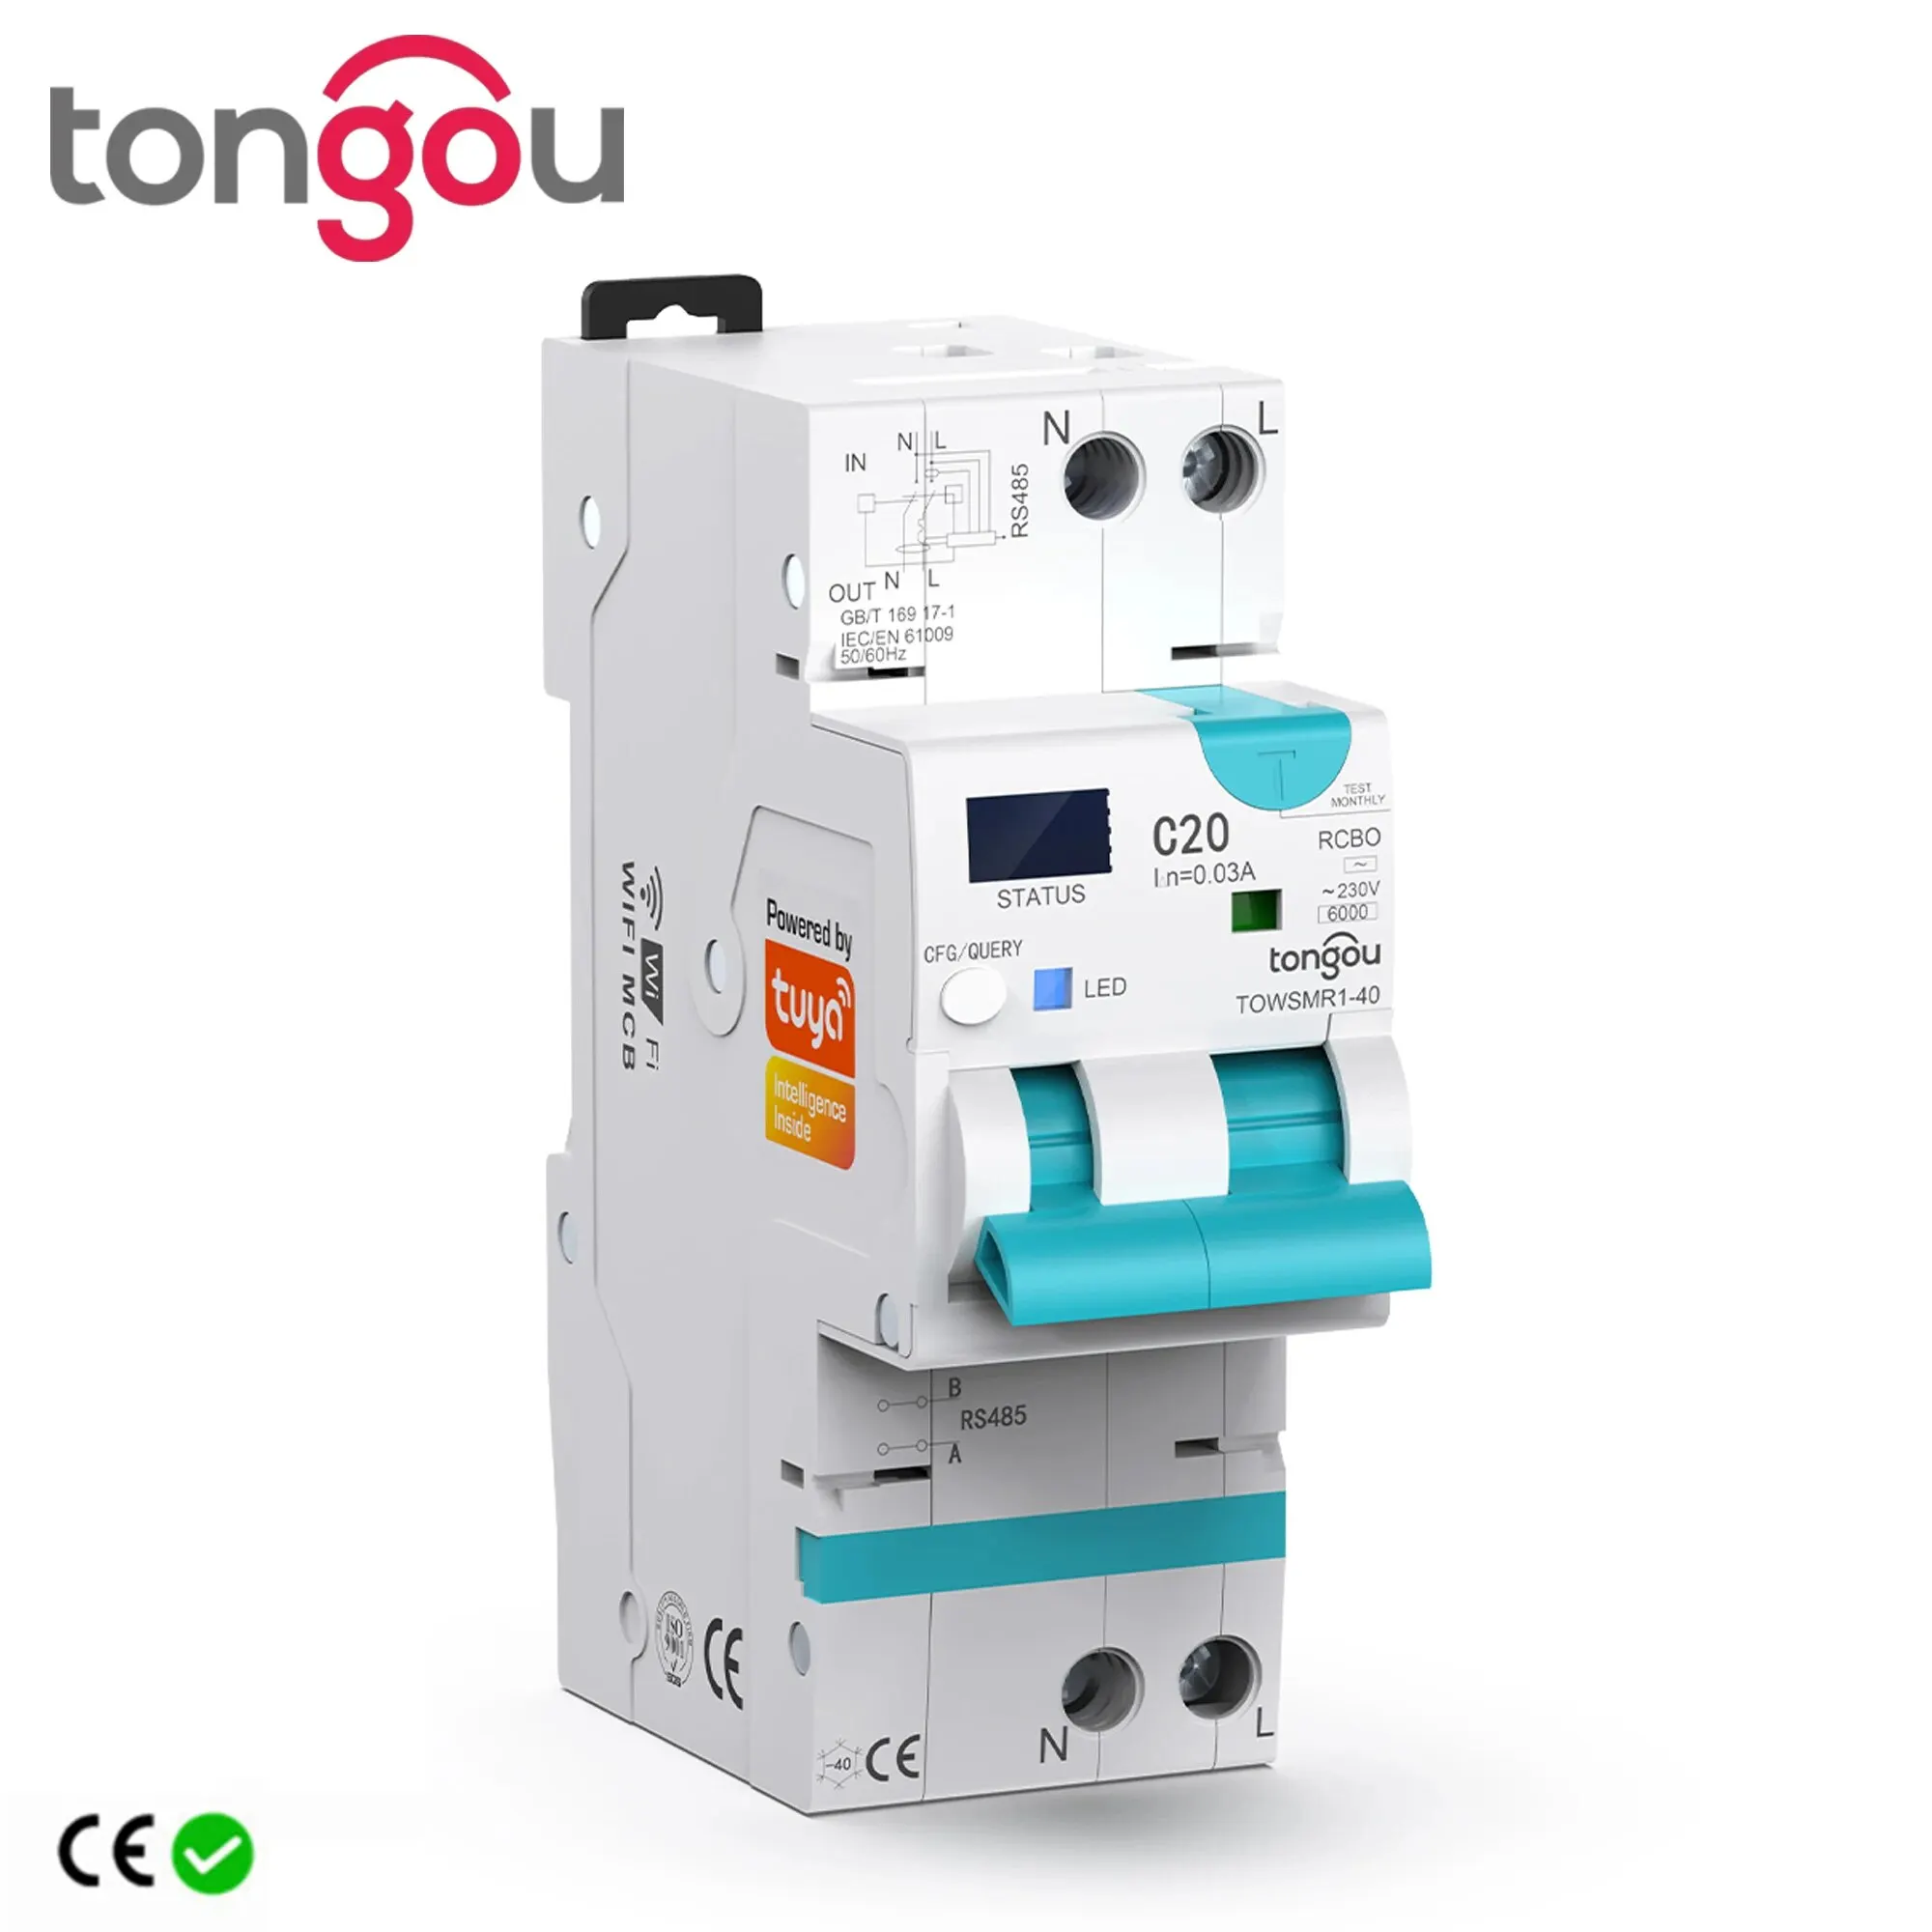 TUYA WIFI RCBO LED Adjustable Smart Circuit Breaker Residual Current Circuit Breaker With Over Current and Leakage Protection